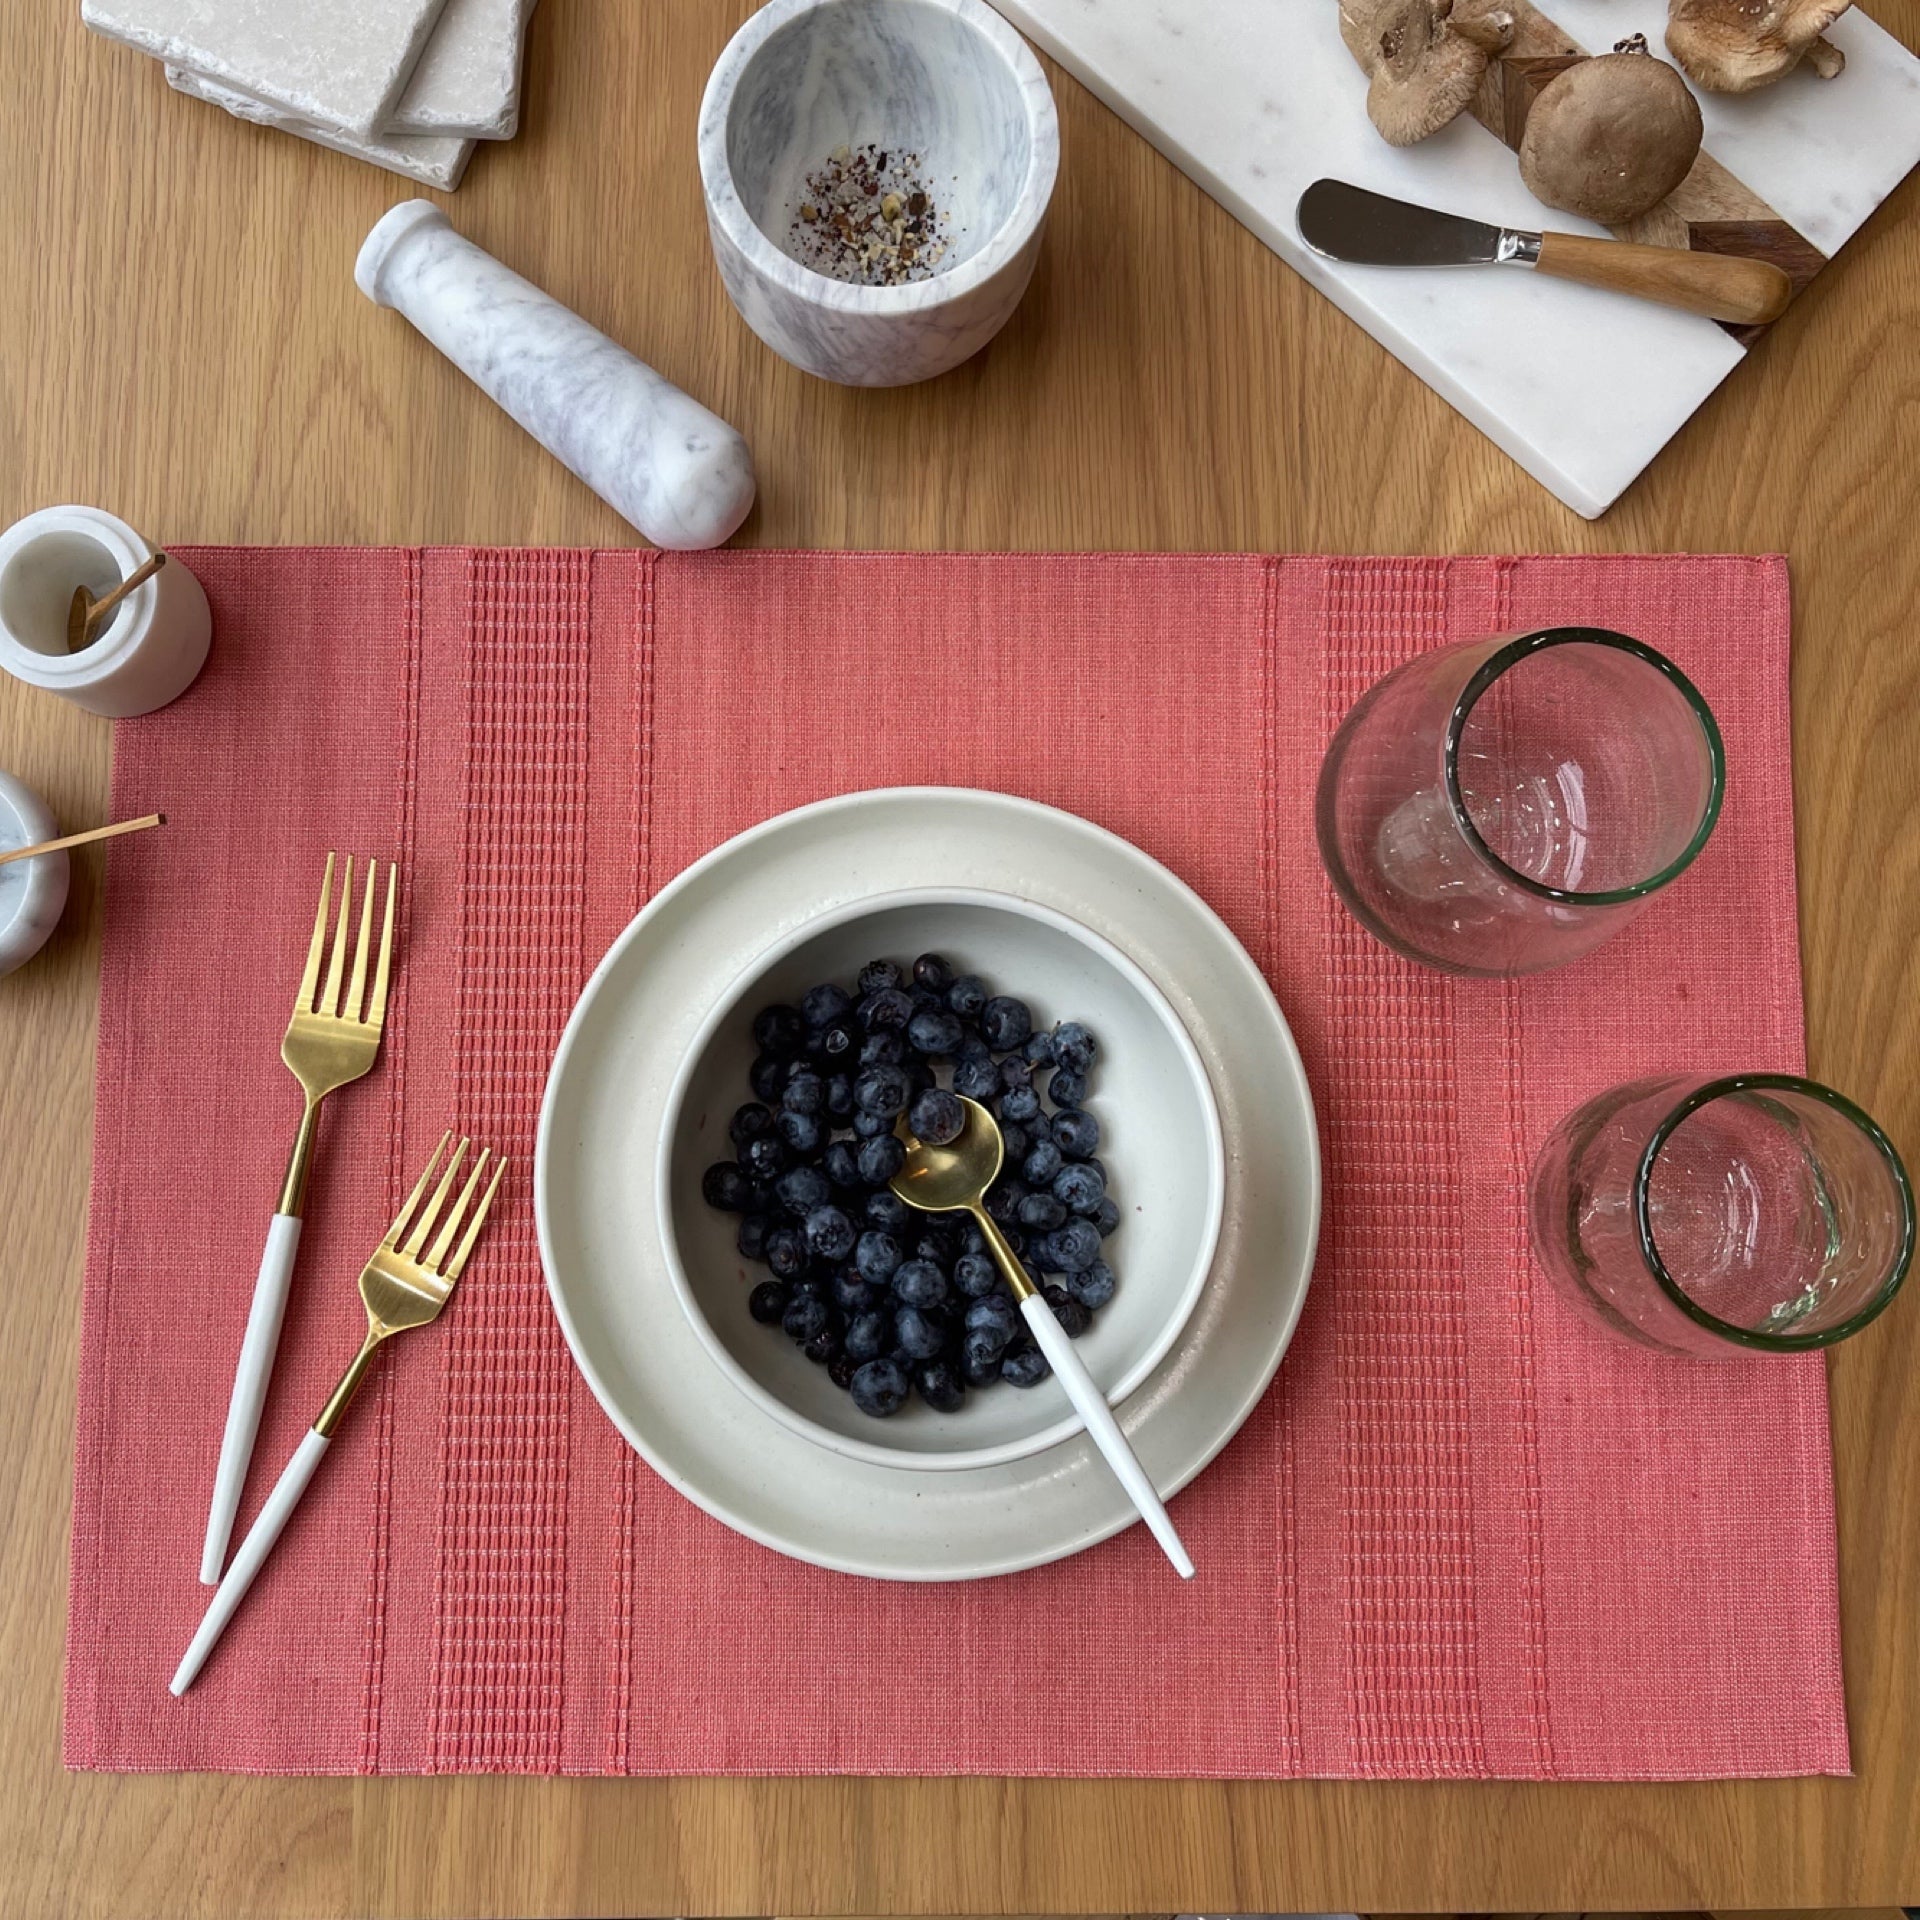 Jamil Handwoven Placemat (Set of 2) - Berry Punch